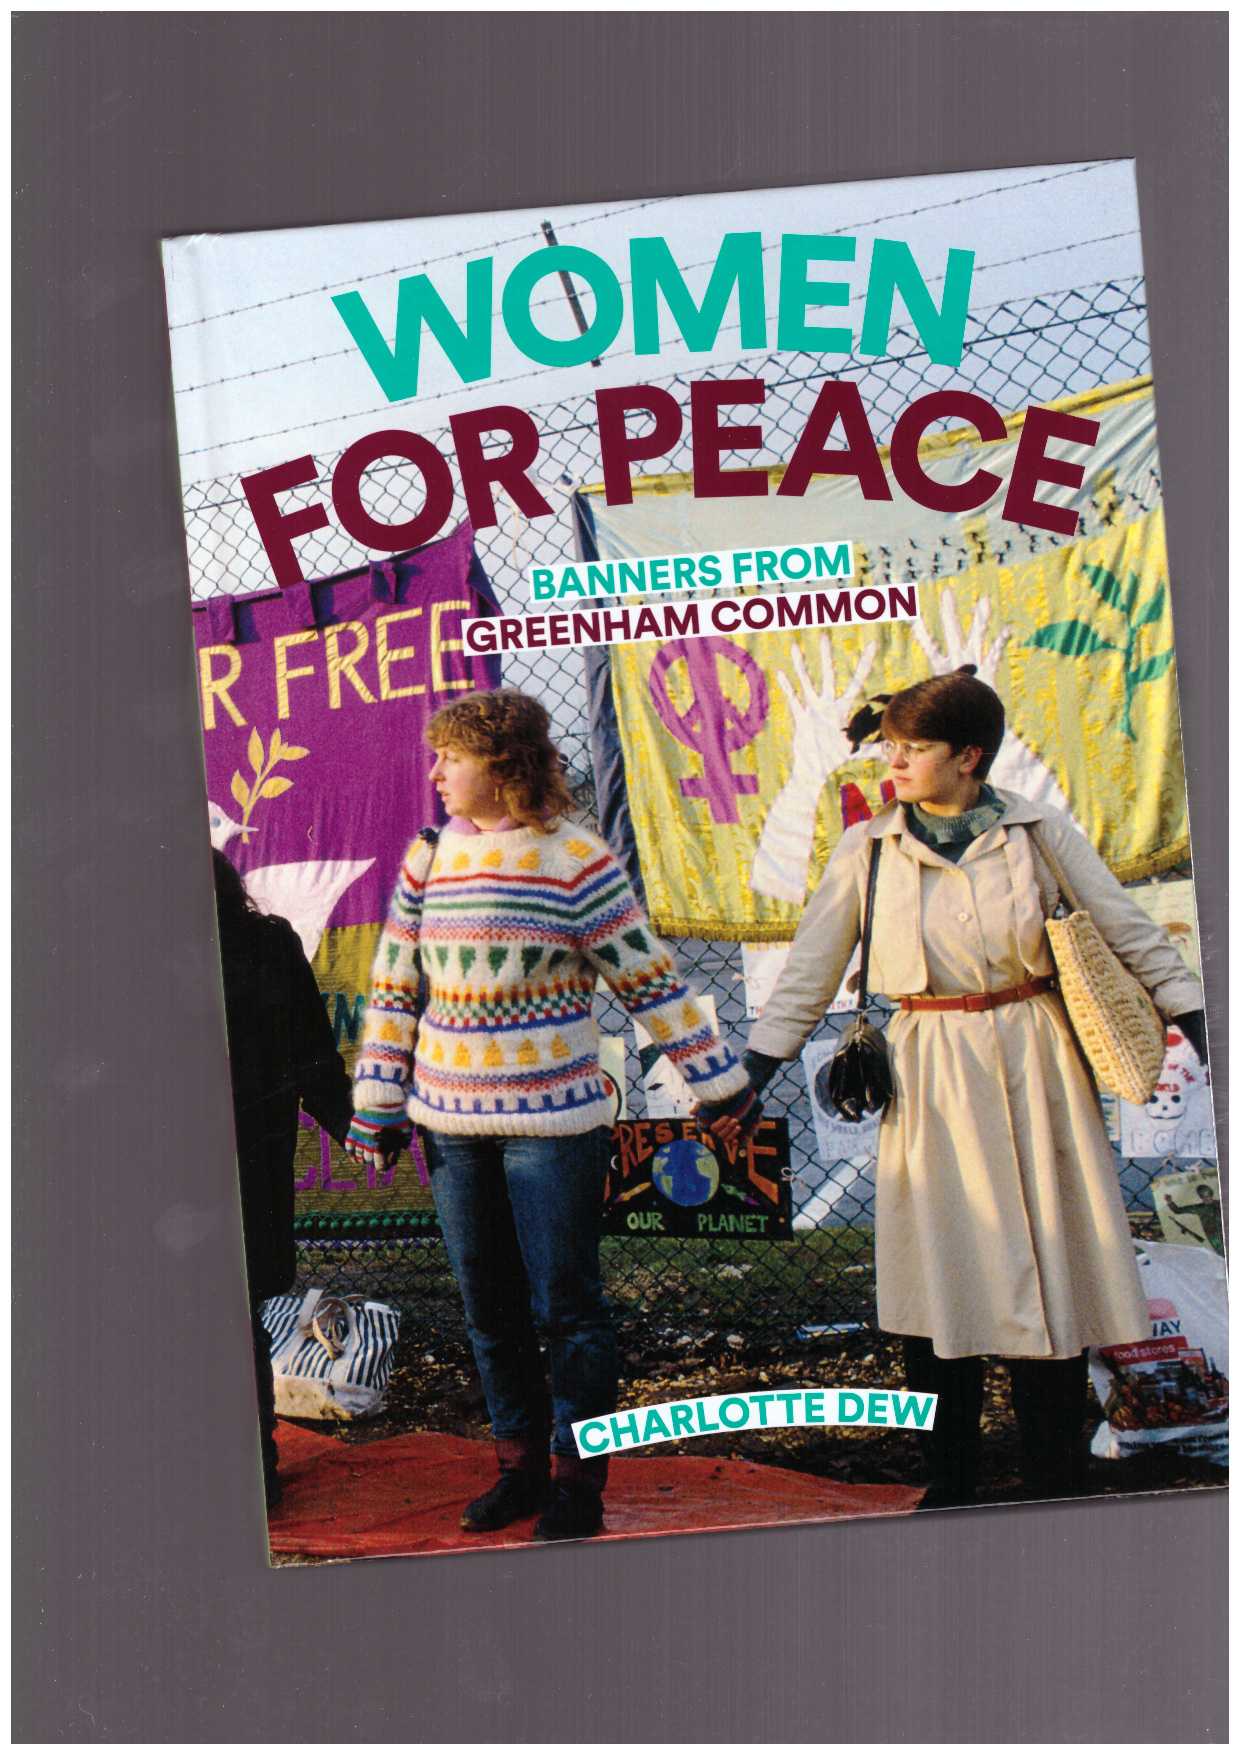 DEW, Charlotte  - Women For Peace - Banners From Greenham Common